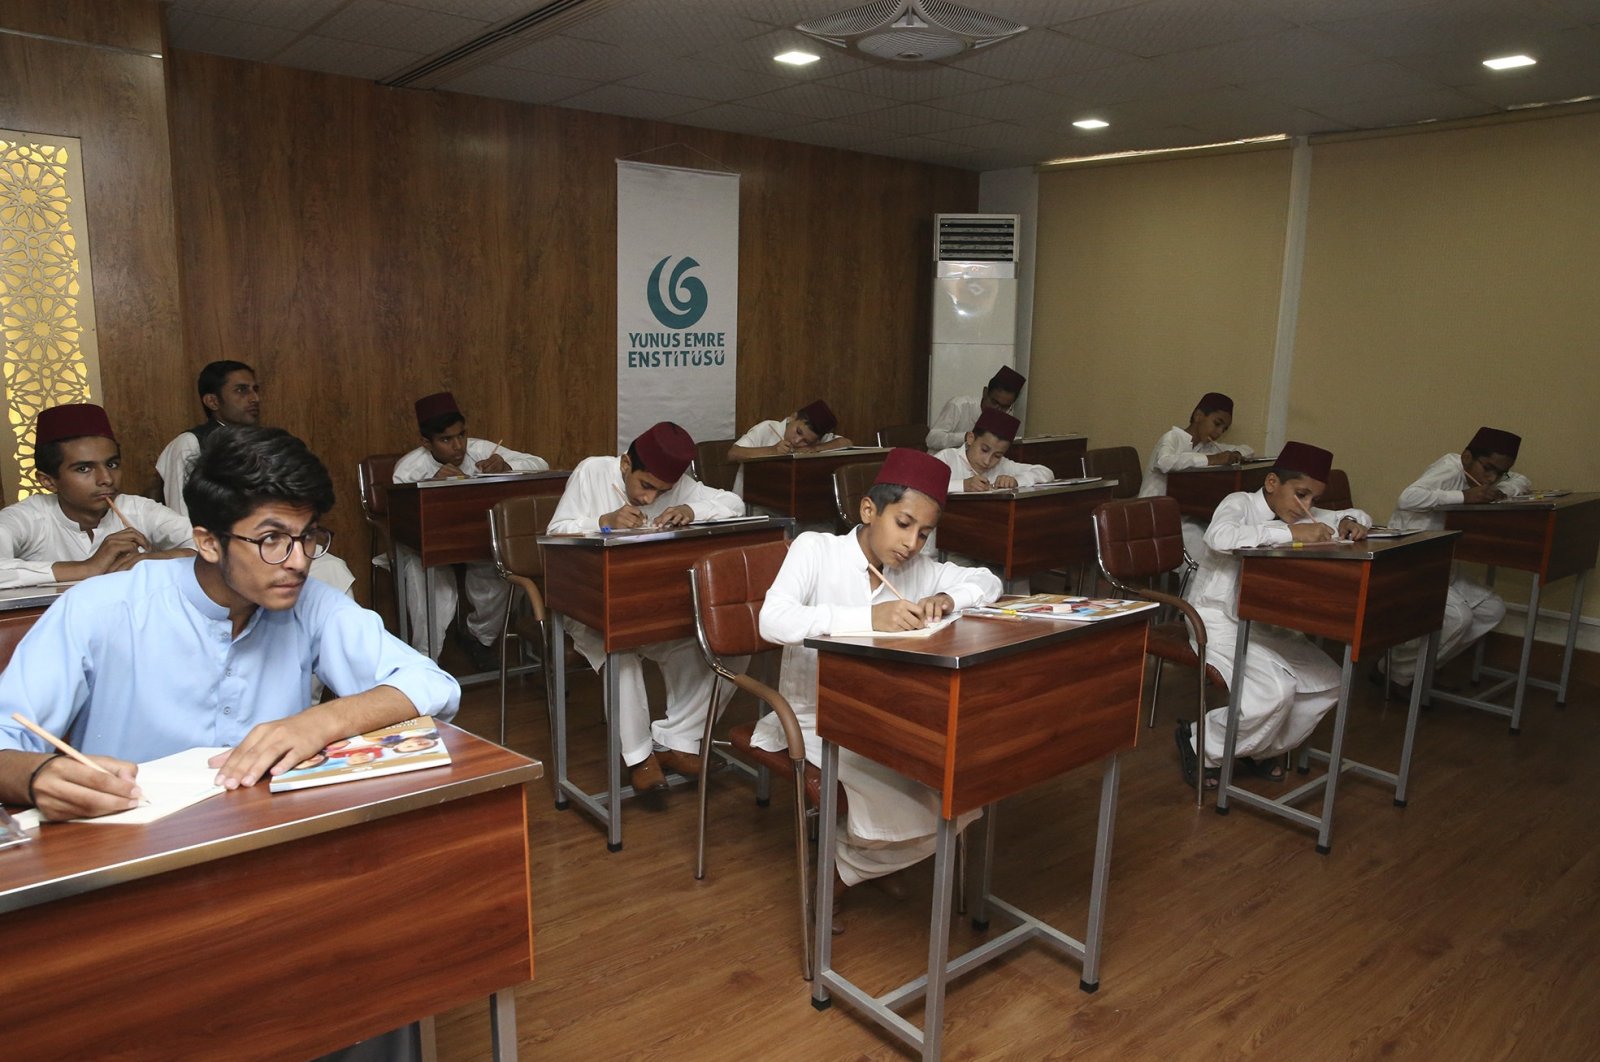 Students attend a Turkish class at a culture center, in Lahore, Pakistan, Oct. 20, 2018. (AA PHOTO) 